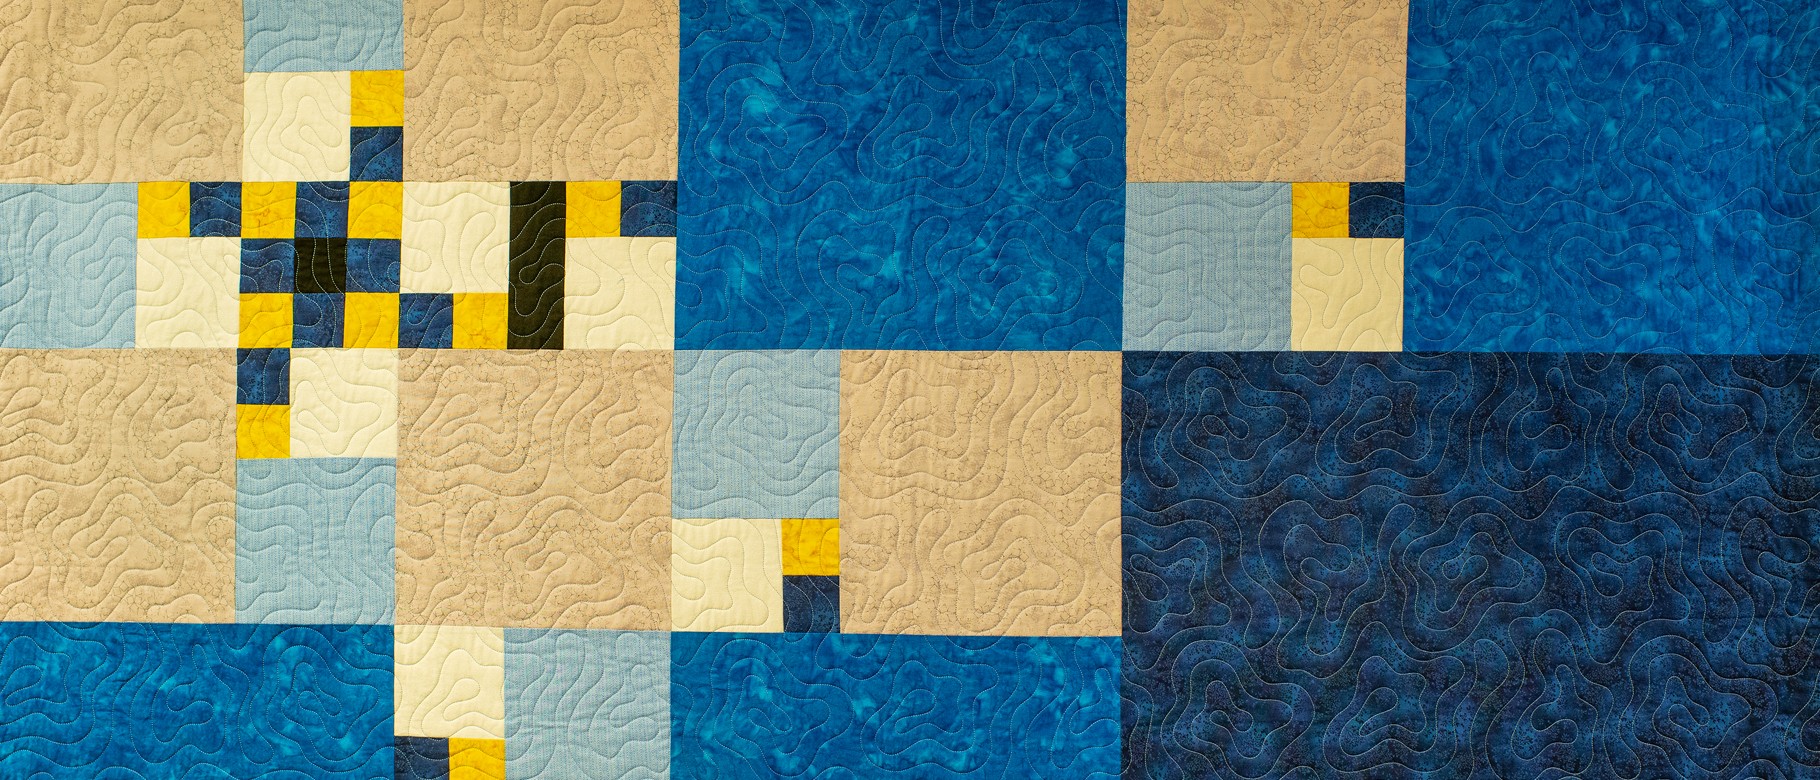 A quilt designed by Ryan Hedstrom, M.S.T., associate teaching professor in the School of Mathematical and Physical Sciences, showcases a design based on the Fibonacci sequence.